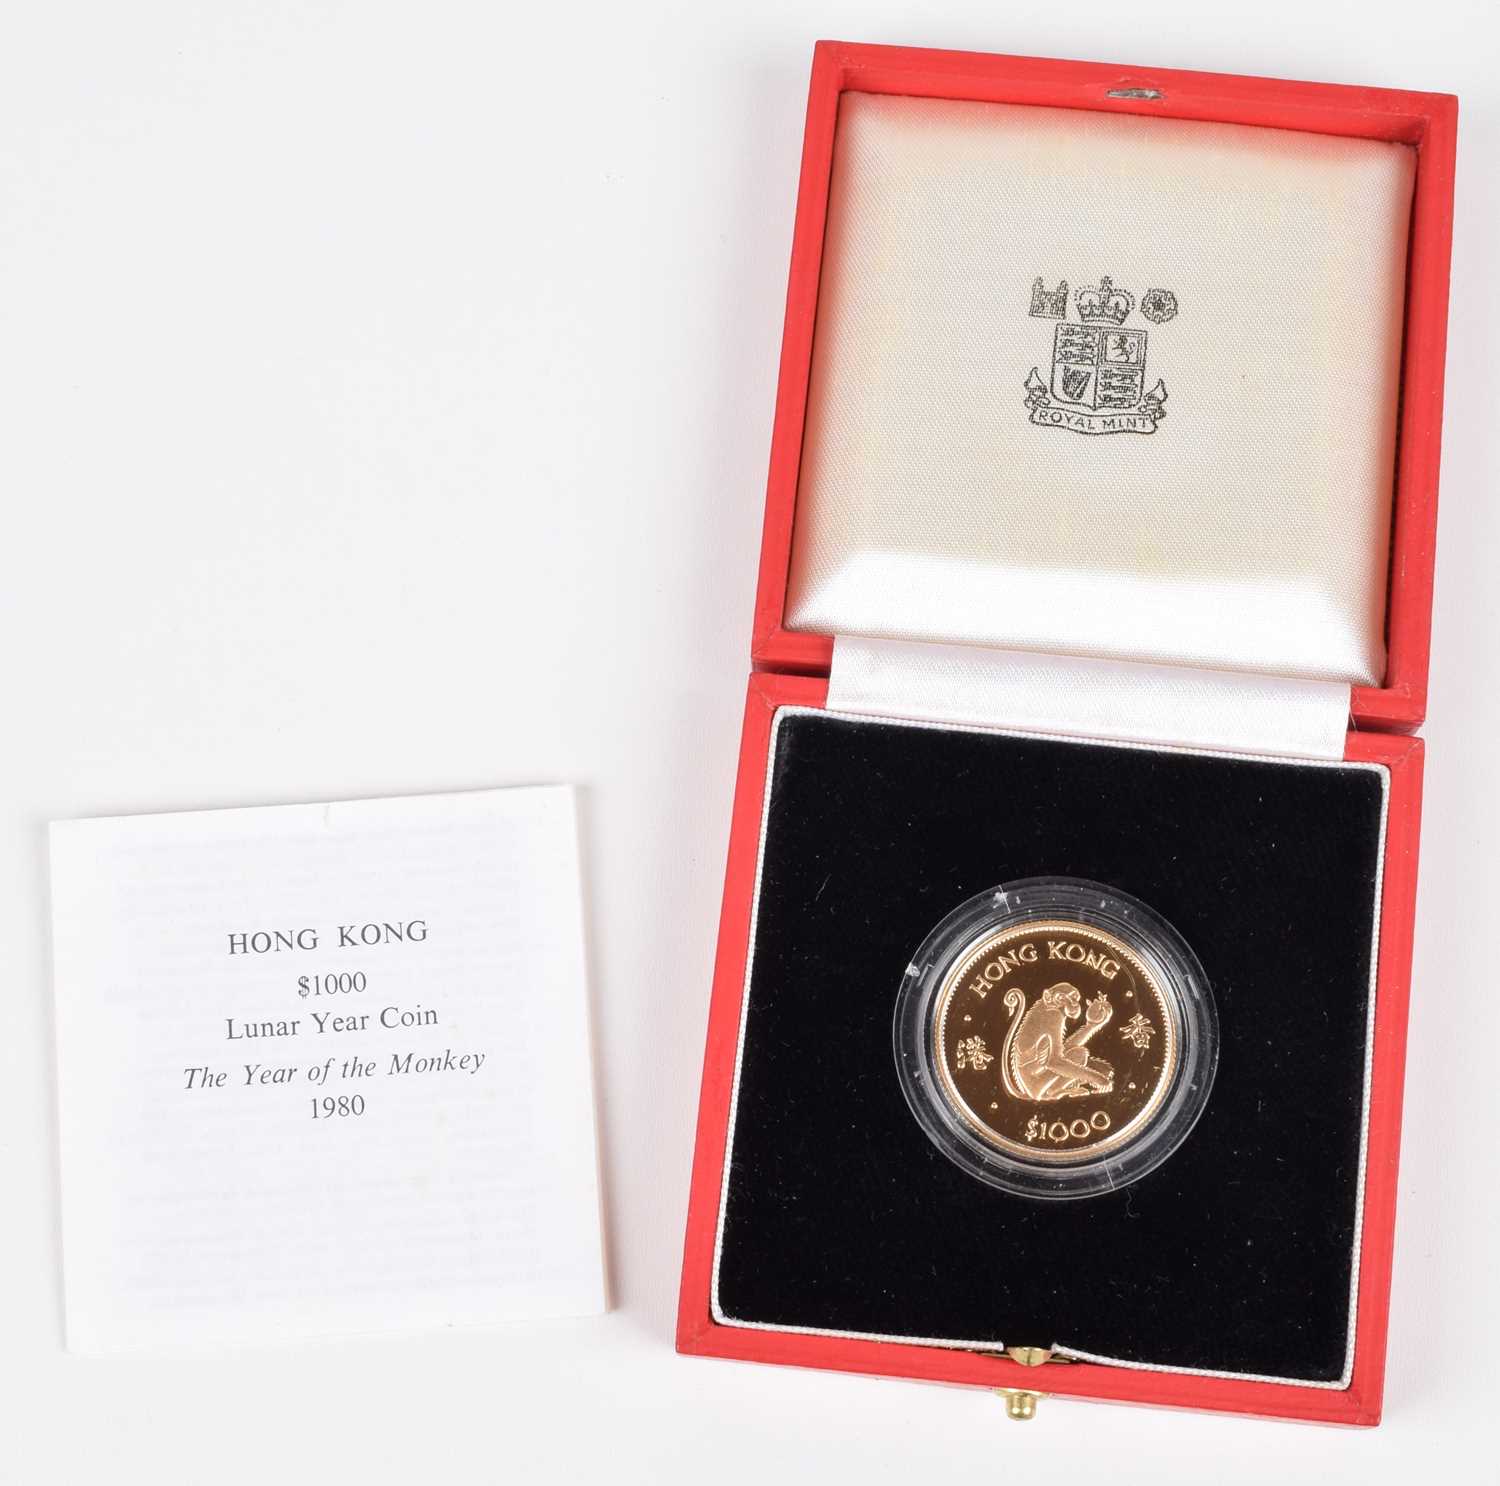 Lot Queen Elizabeth II, Hong Kong, $1000 Lunar Year Gold Proof Coin, 1980, The Year of the Monkey.